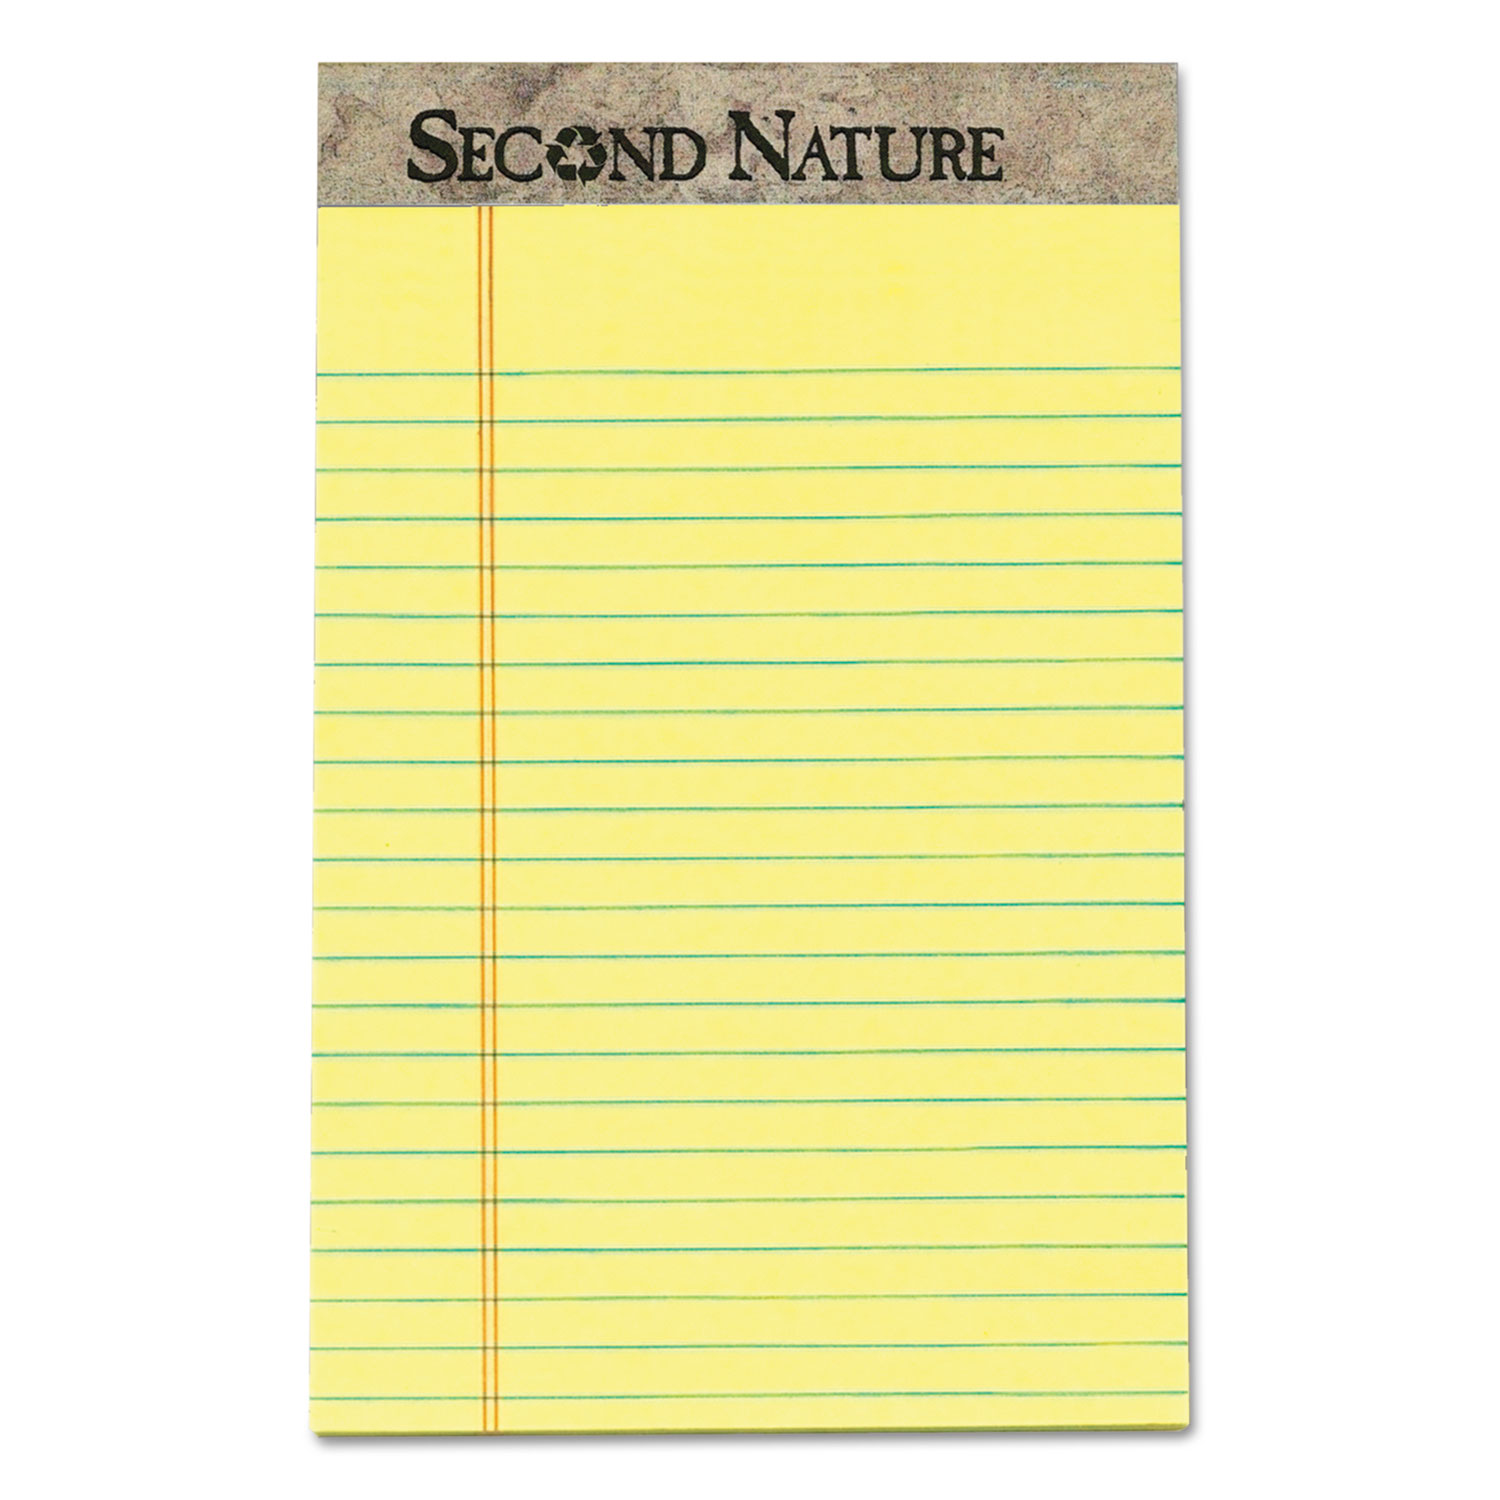  TOPS 74840 Second Nature Recycled Ruled Pads, Narrow Rule, 5 x 8, Canary, 50 Sheets, Dozen (TOP74840) 